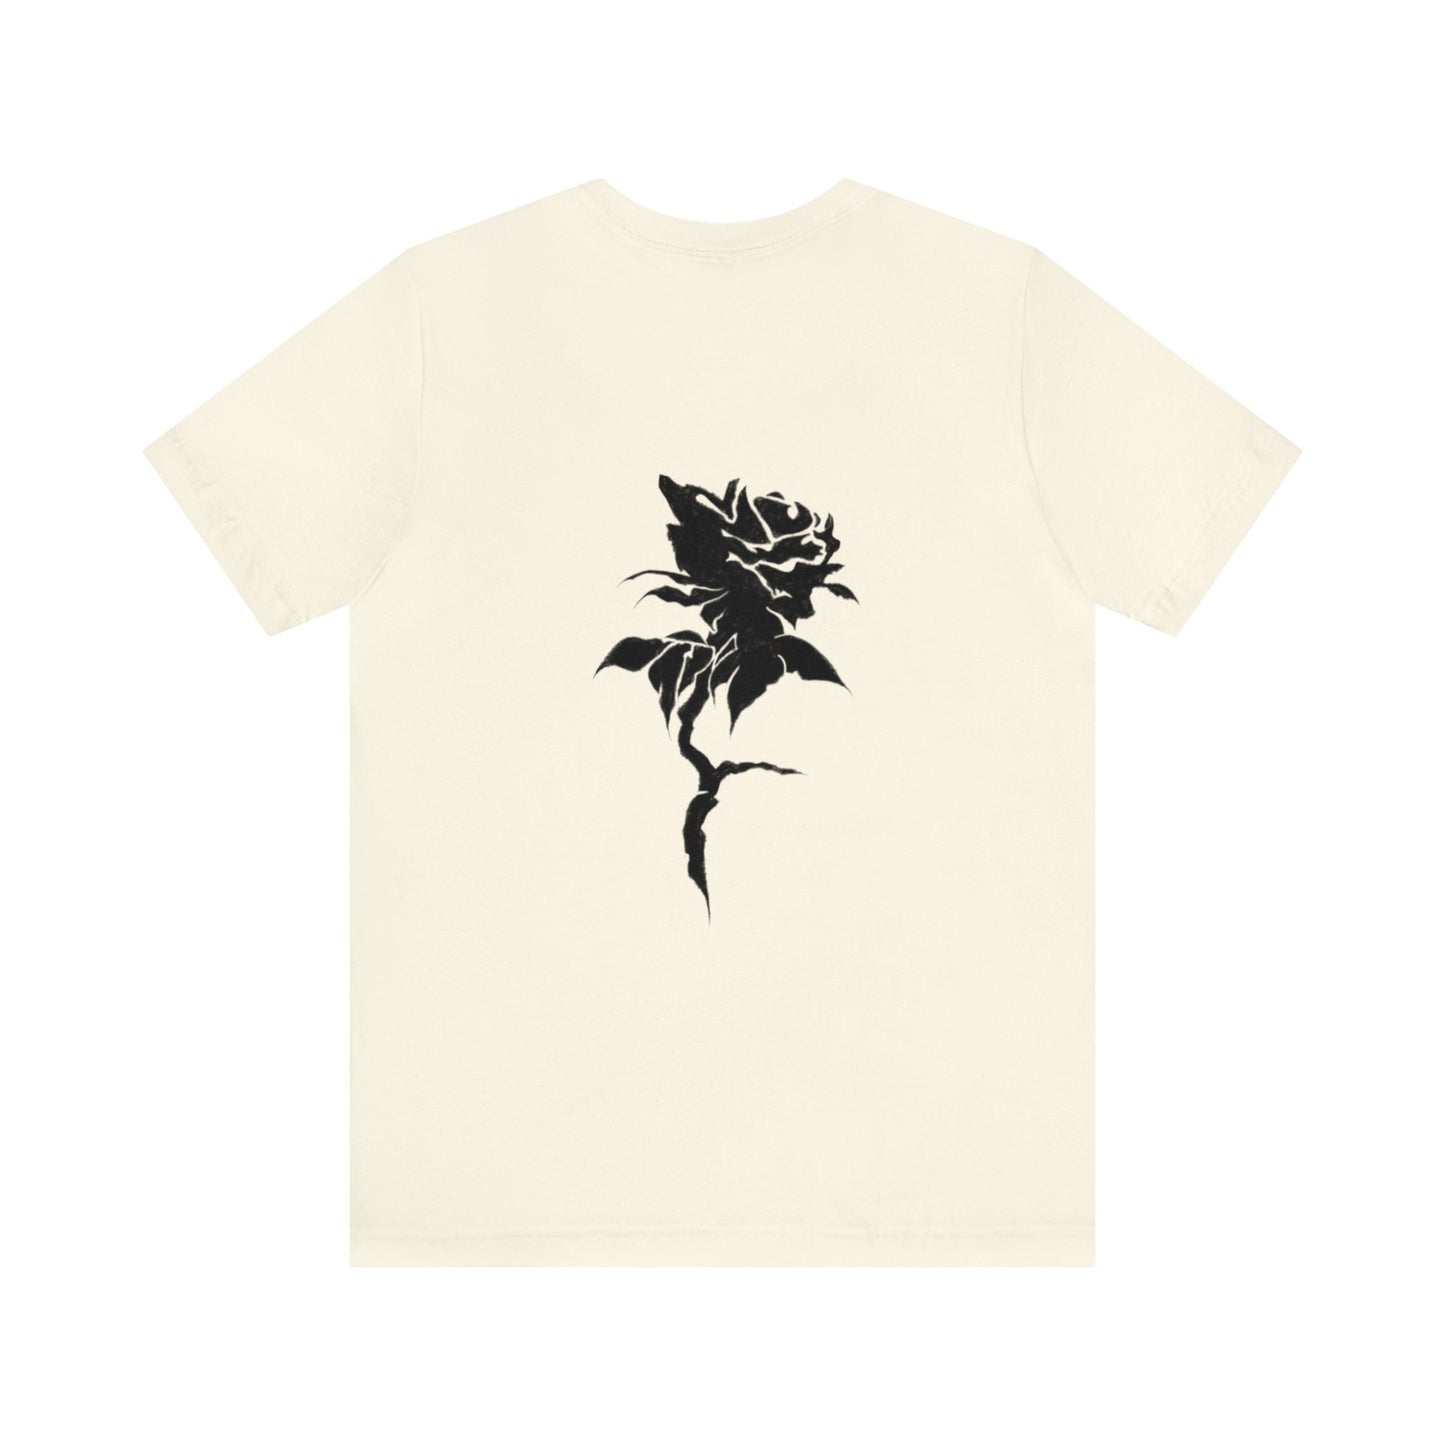 Original Pen and Potions Rose Tattoo Artwork Short Sleeve Tee Perfect Gift for Men and Women